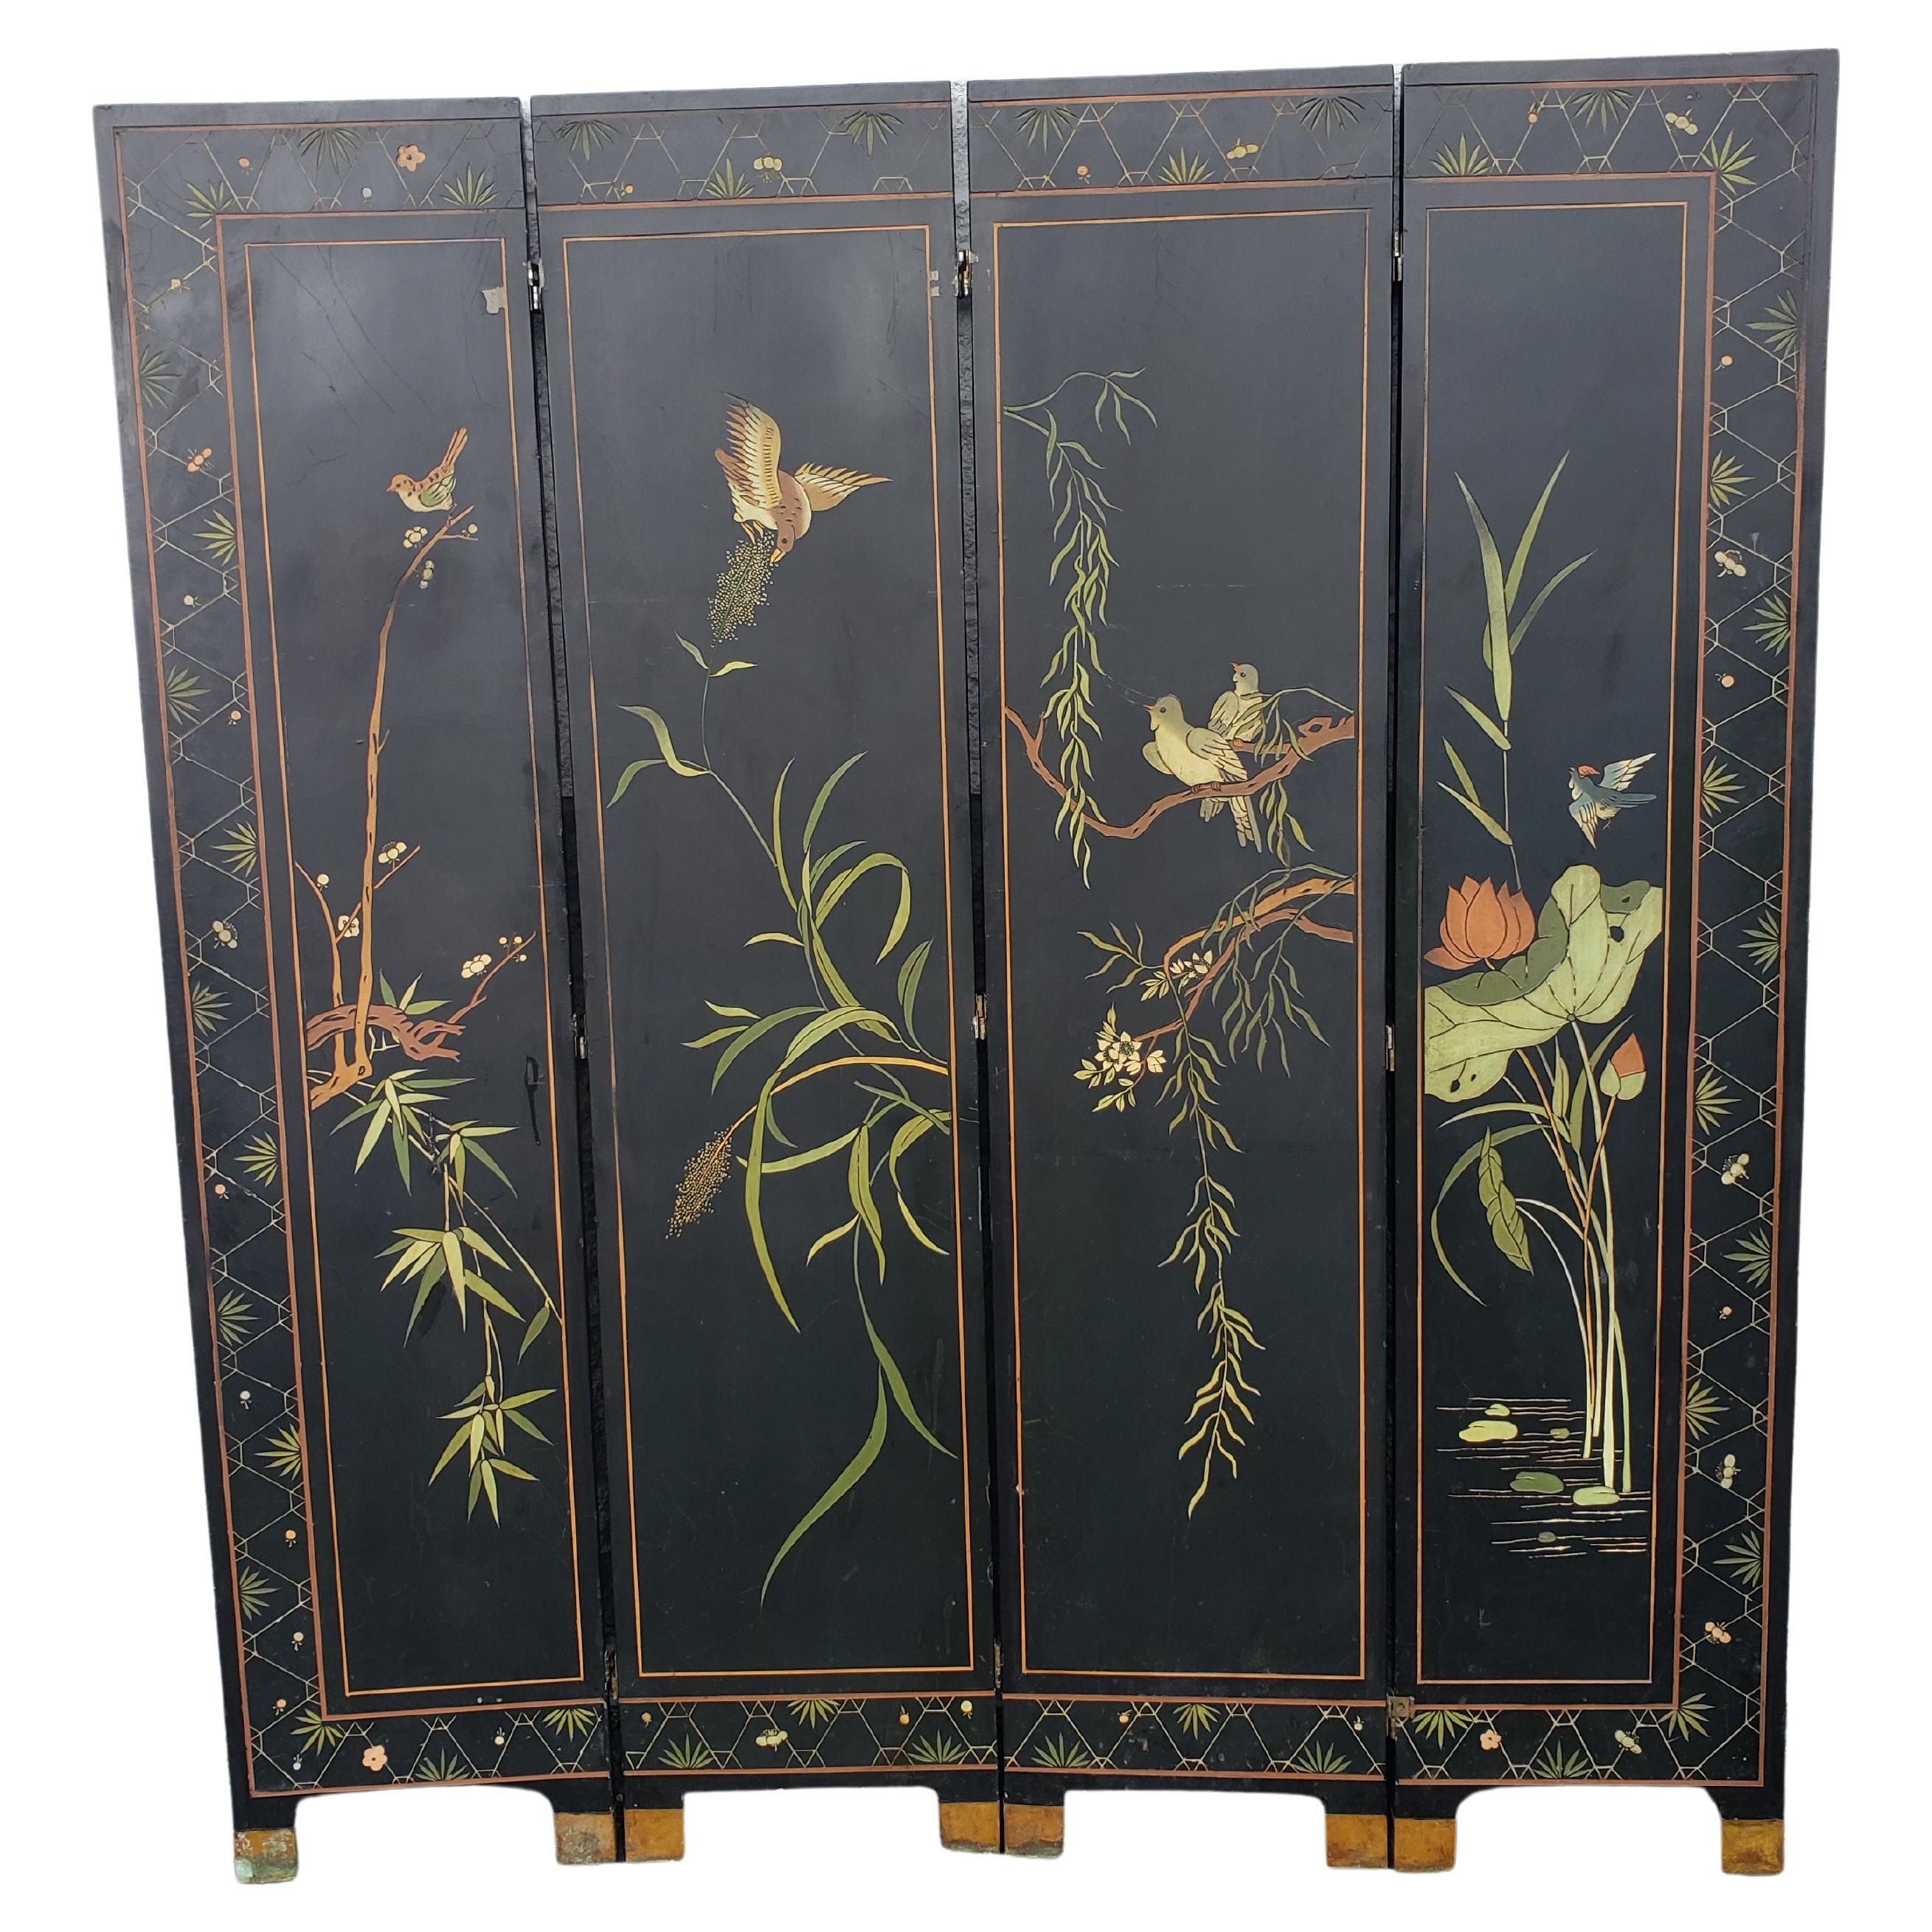 This vintage wood 4 panel, black lacquered Asian room divider is beautifully carved and painted on both sides. Each side displaying a different scene, one side for with birds and flowers, the other side for Asian Taiga forest scene. Brass capped